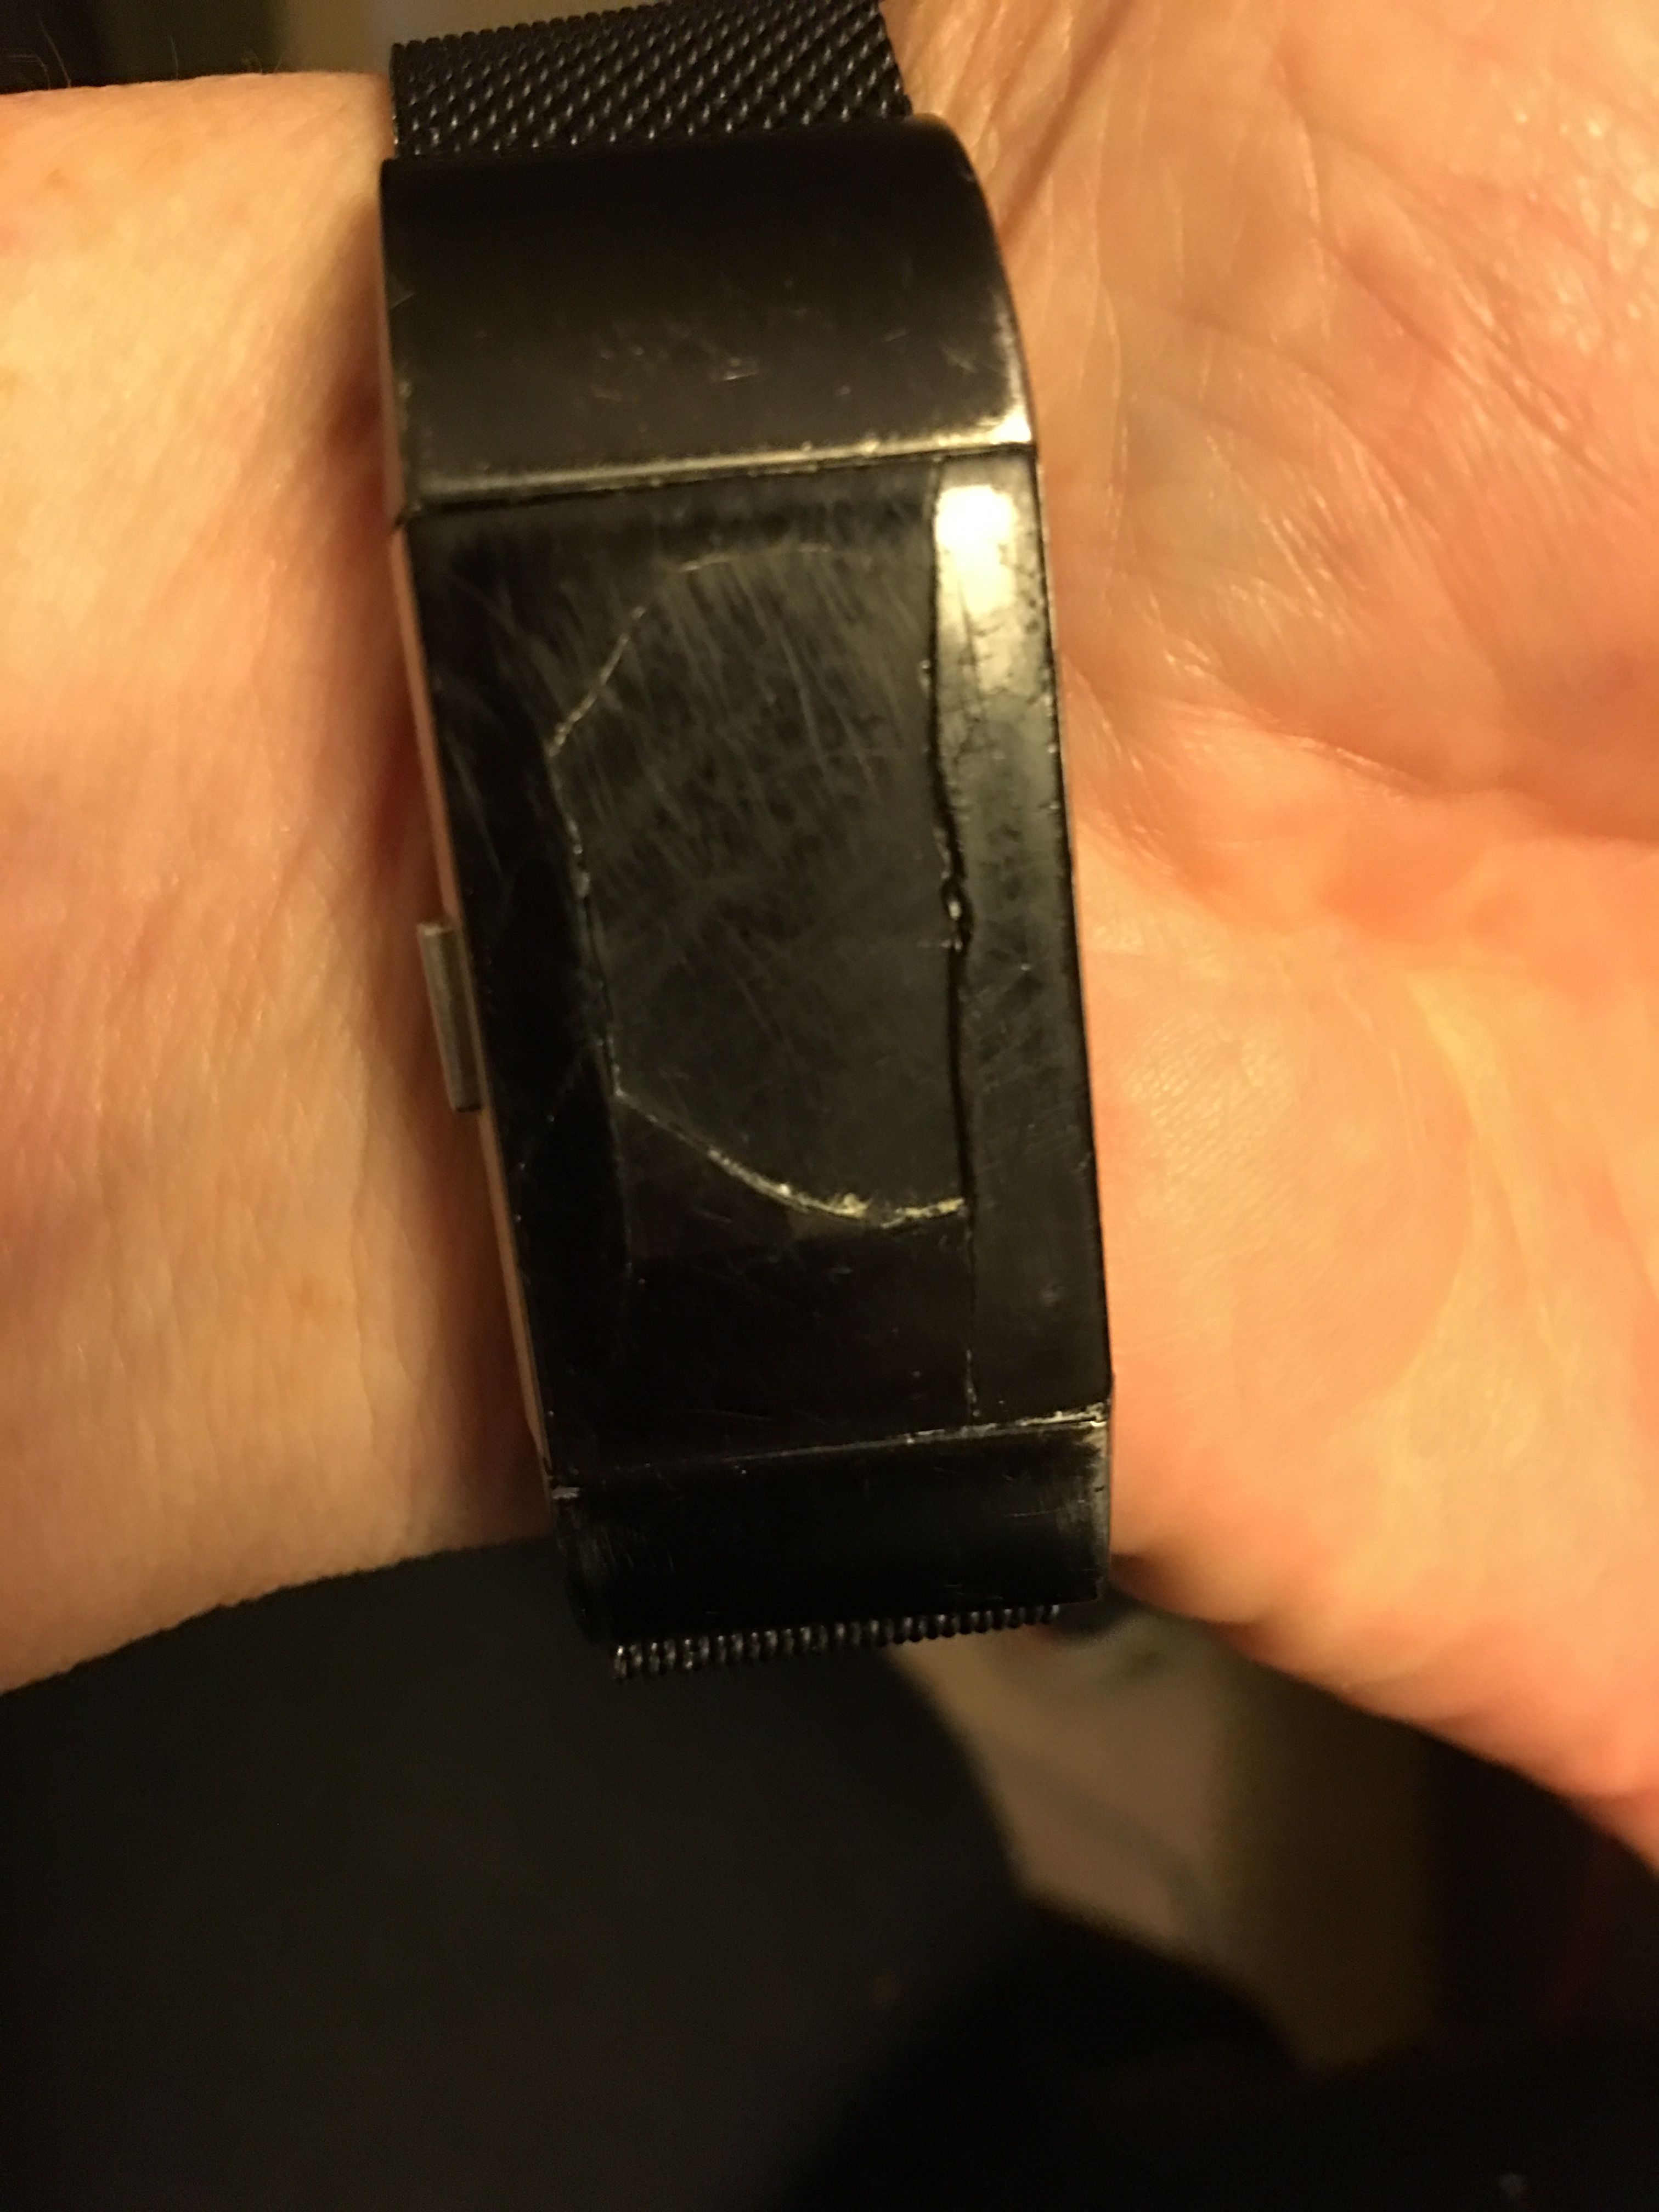 cracked fitbit